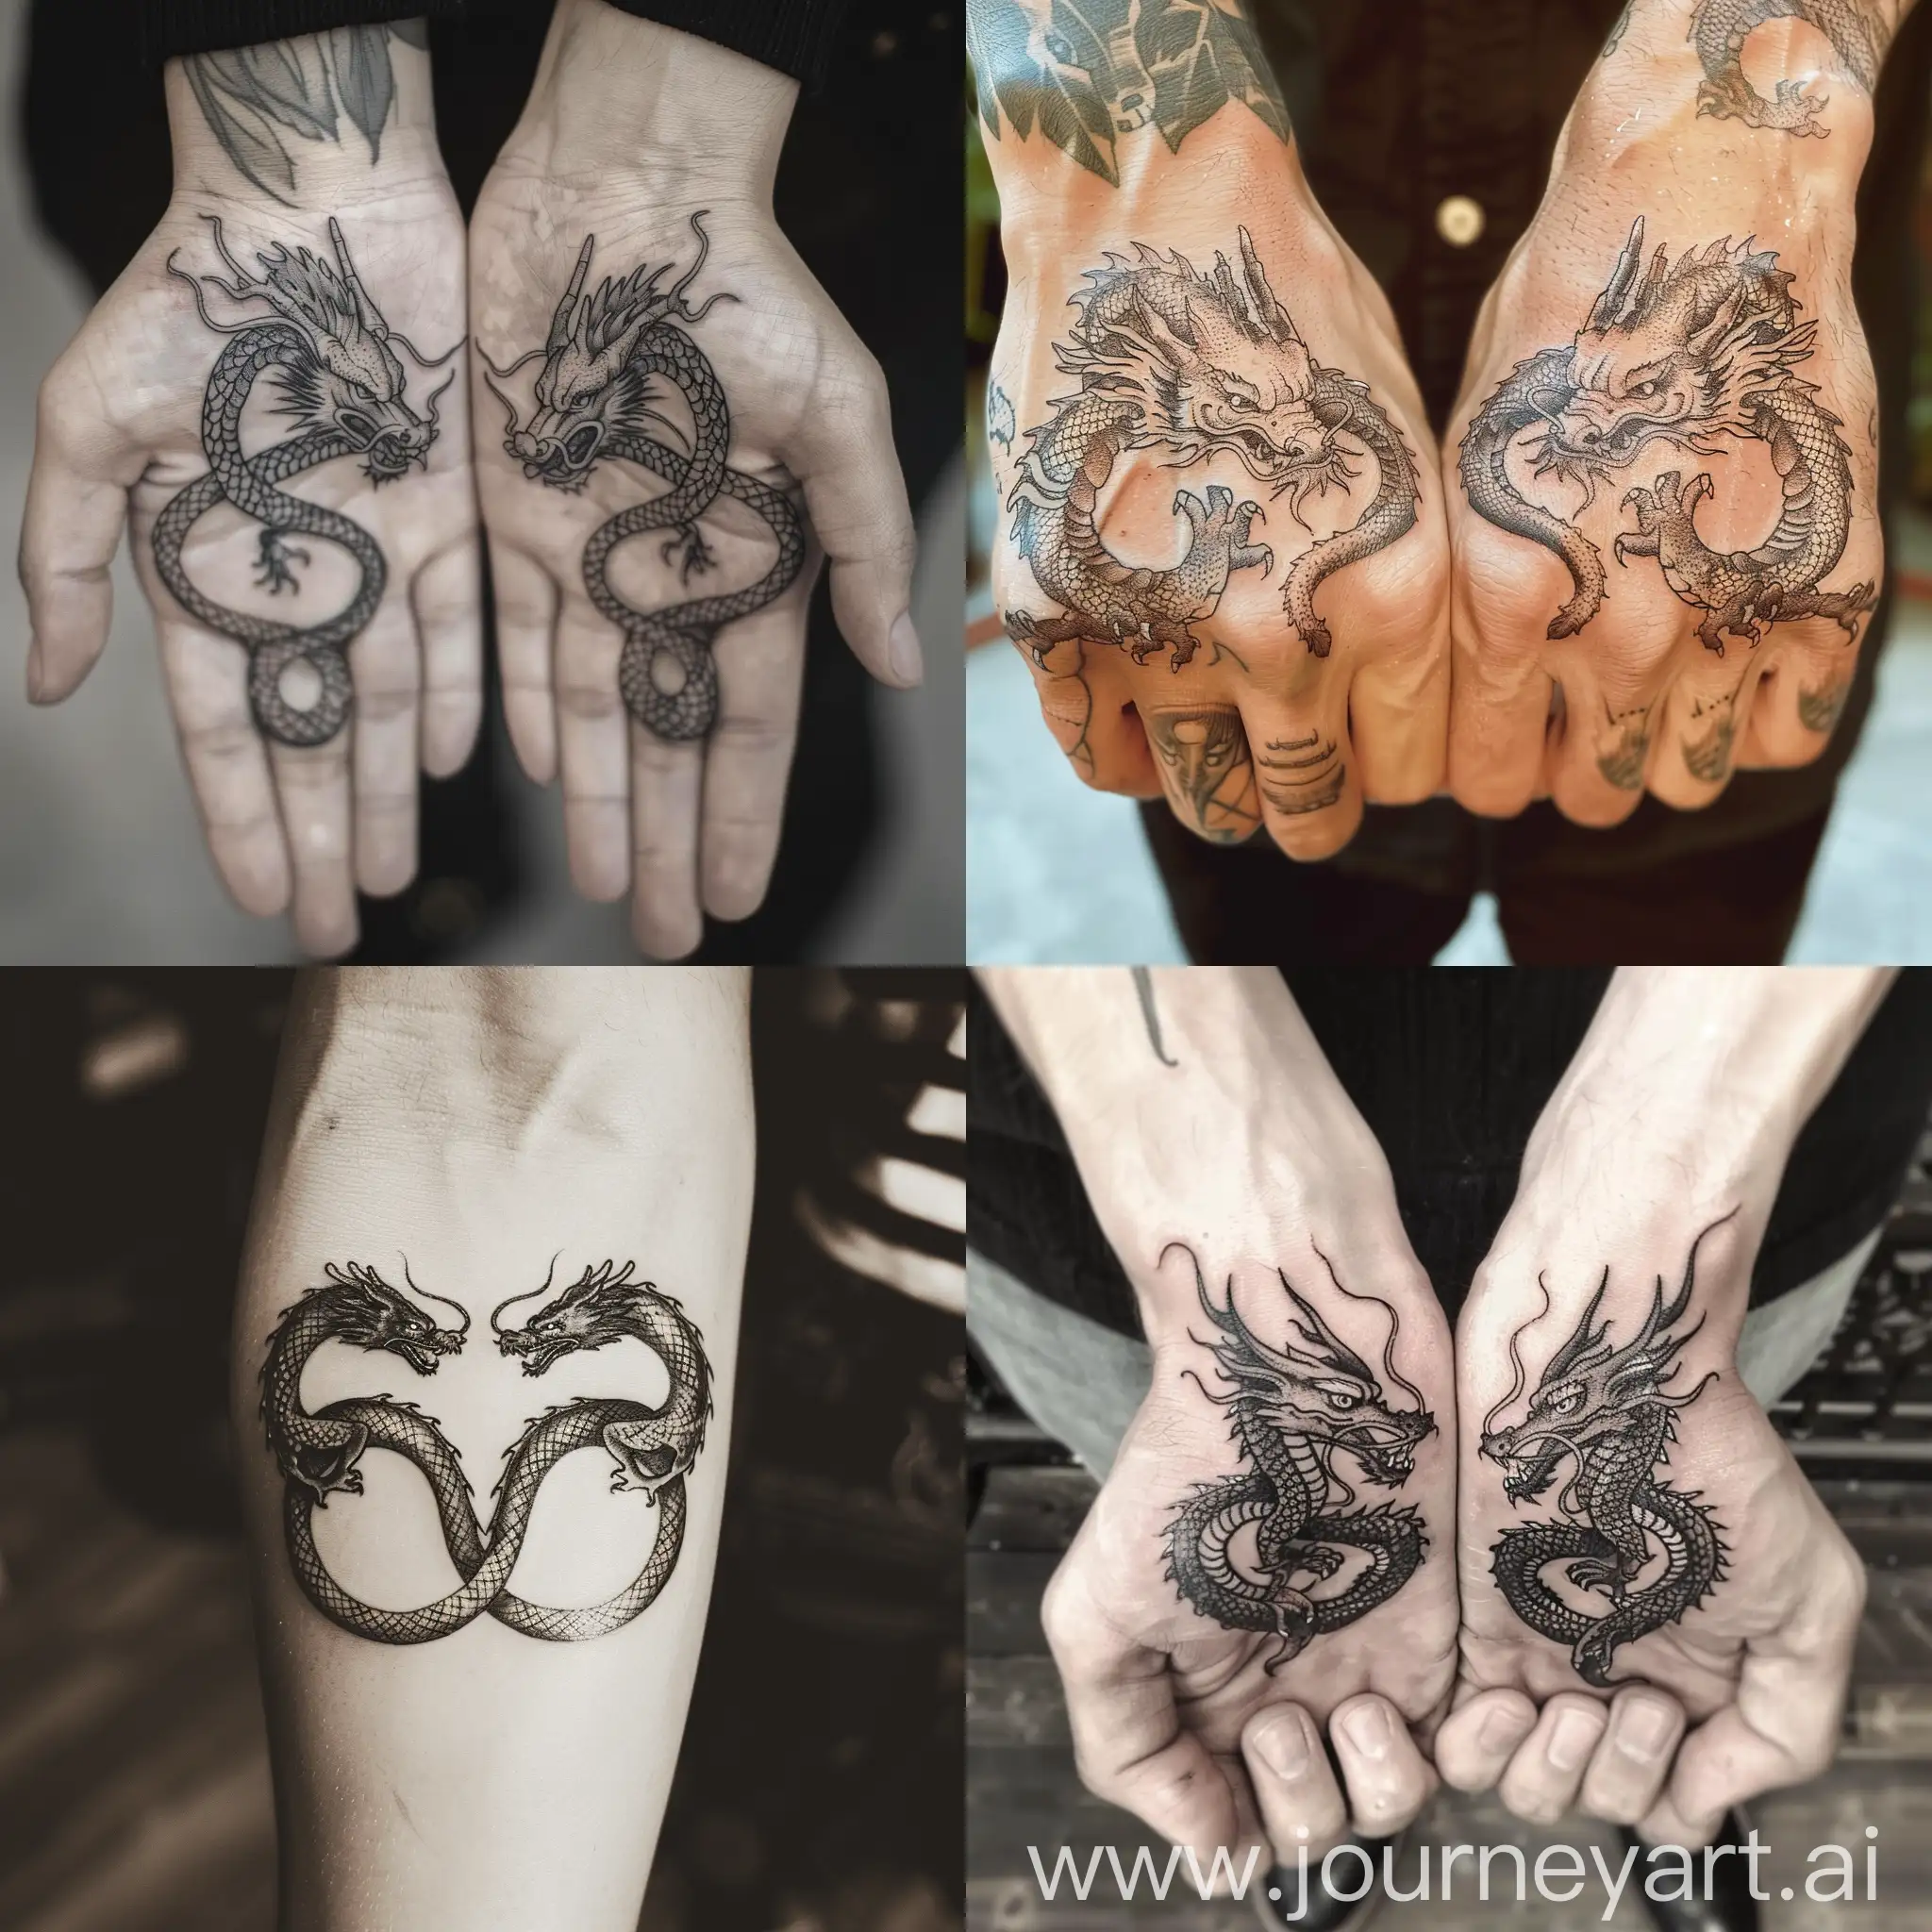 Eastern-and-Western-Dragon-Tattoo-Rings-with-Stylized-Hands